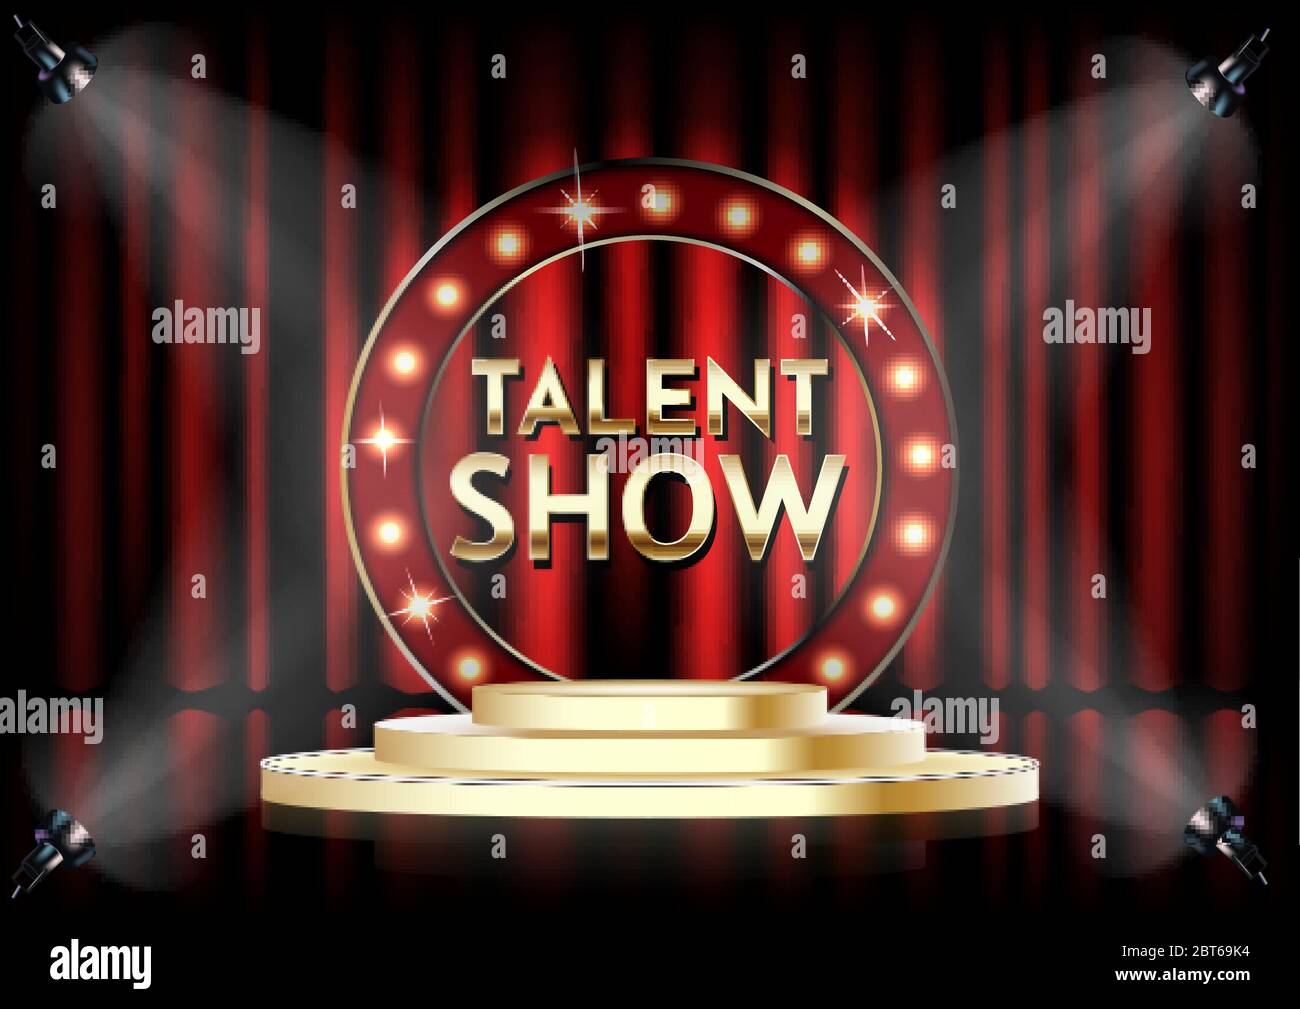 Talent Show Poster Template from c8.alamy.com